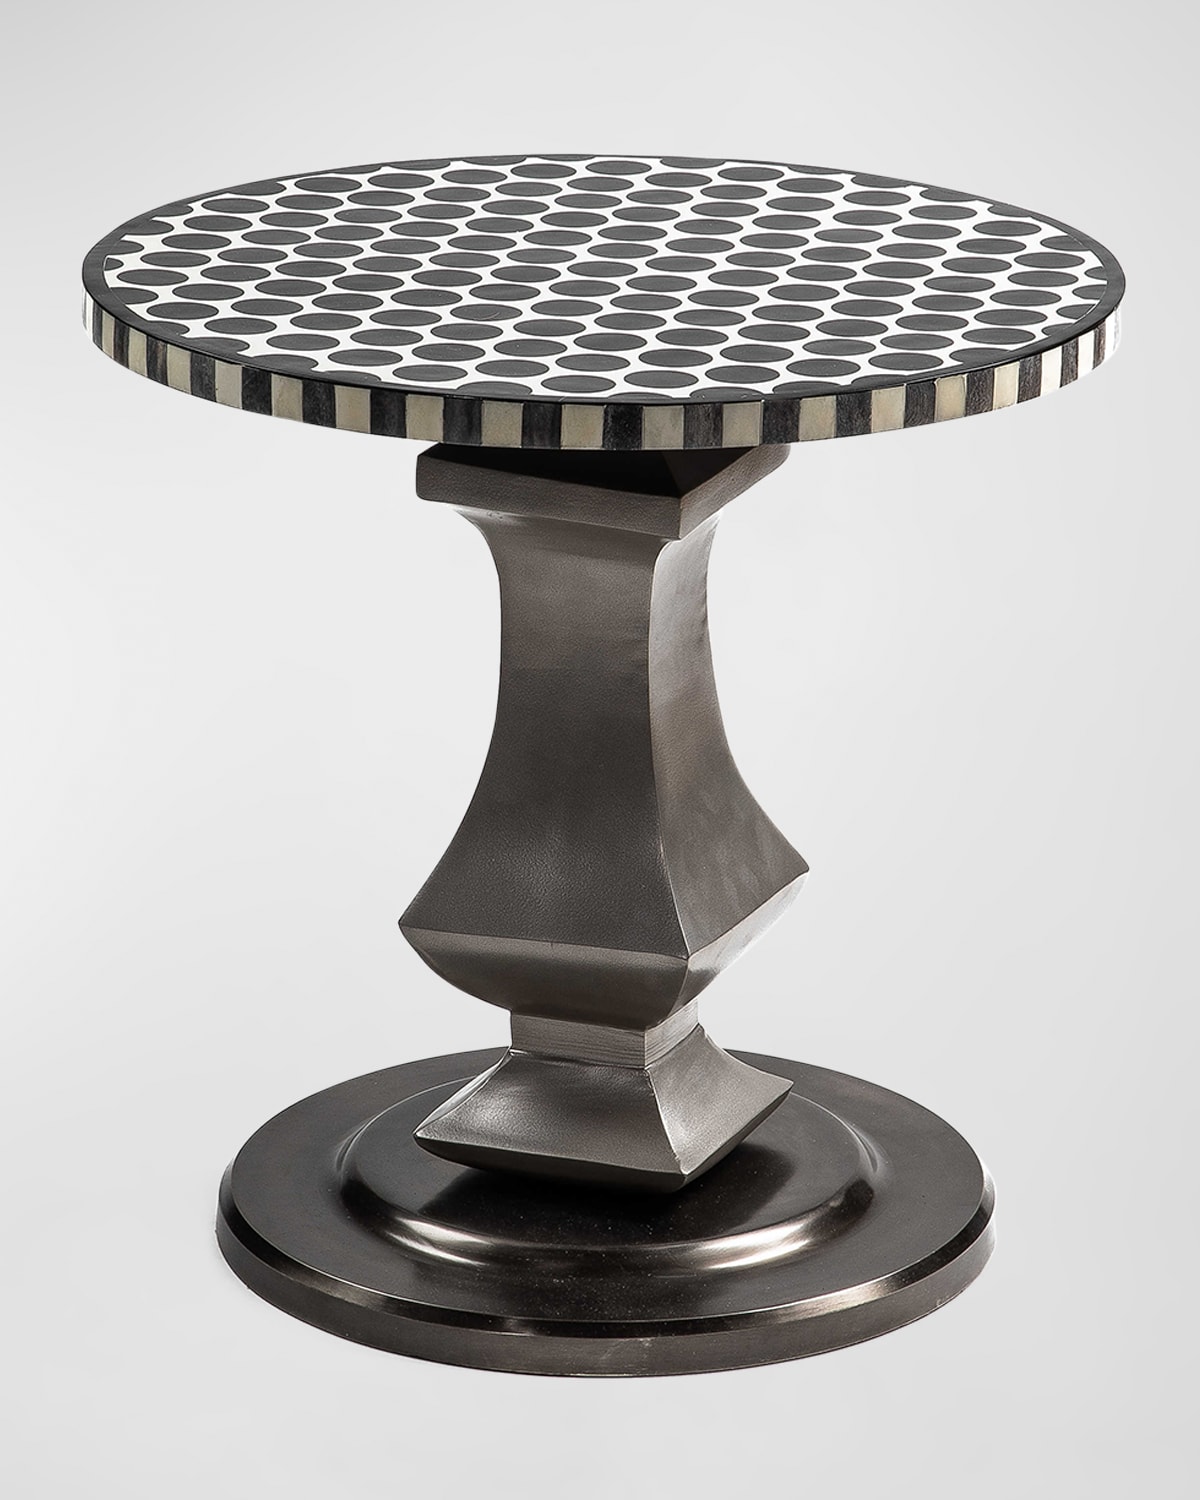 Mackenzie-childs Black Spot On Accent Table